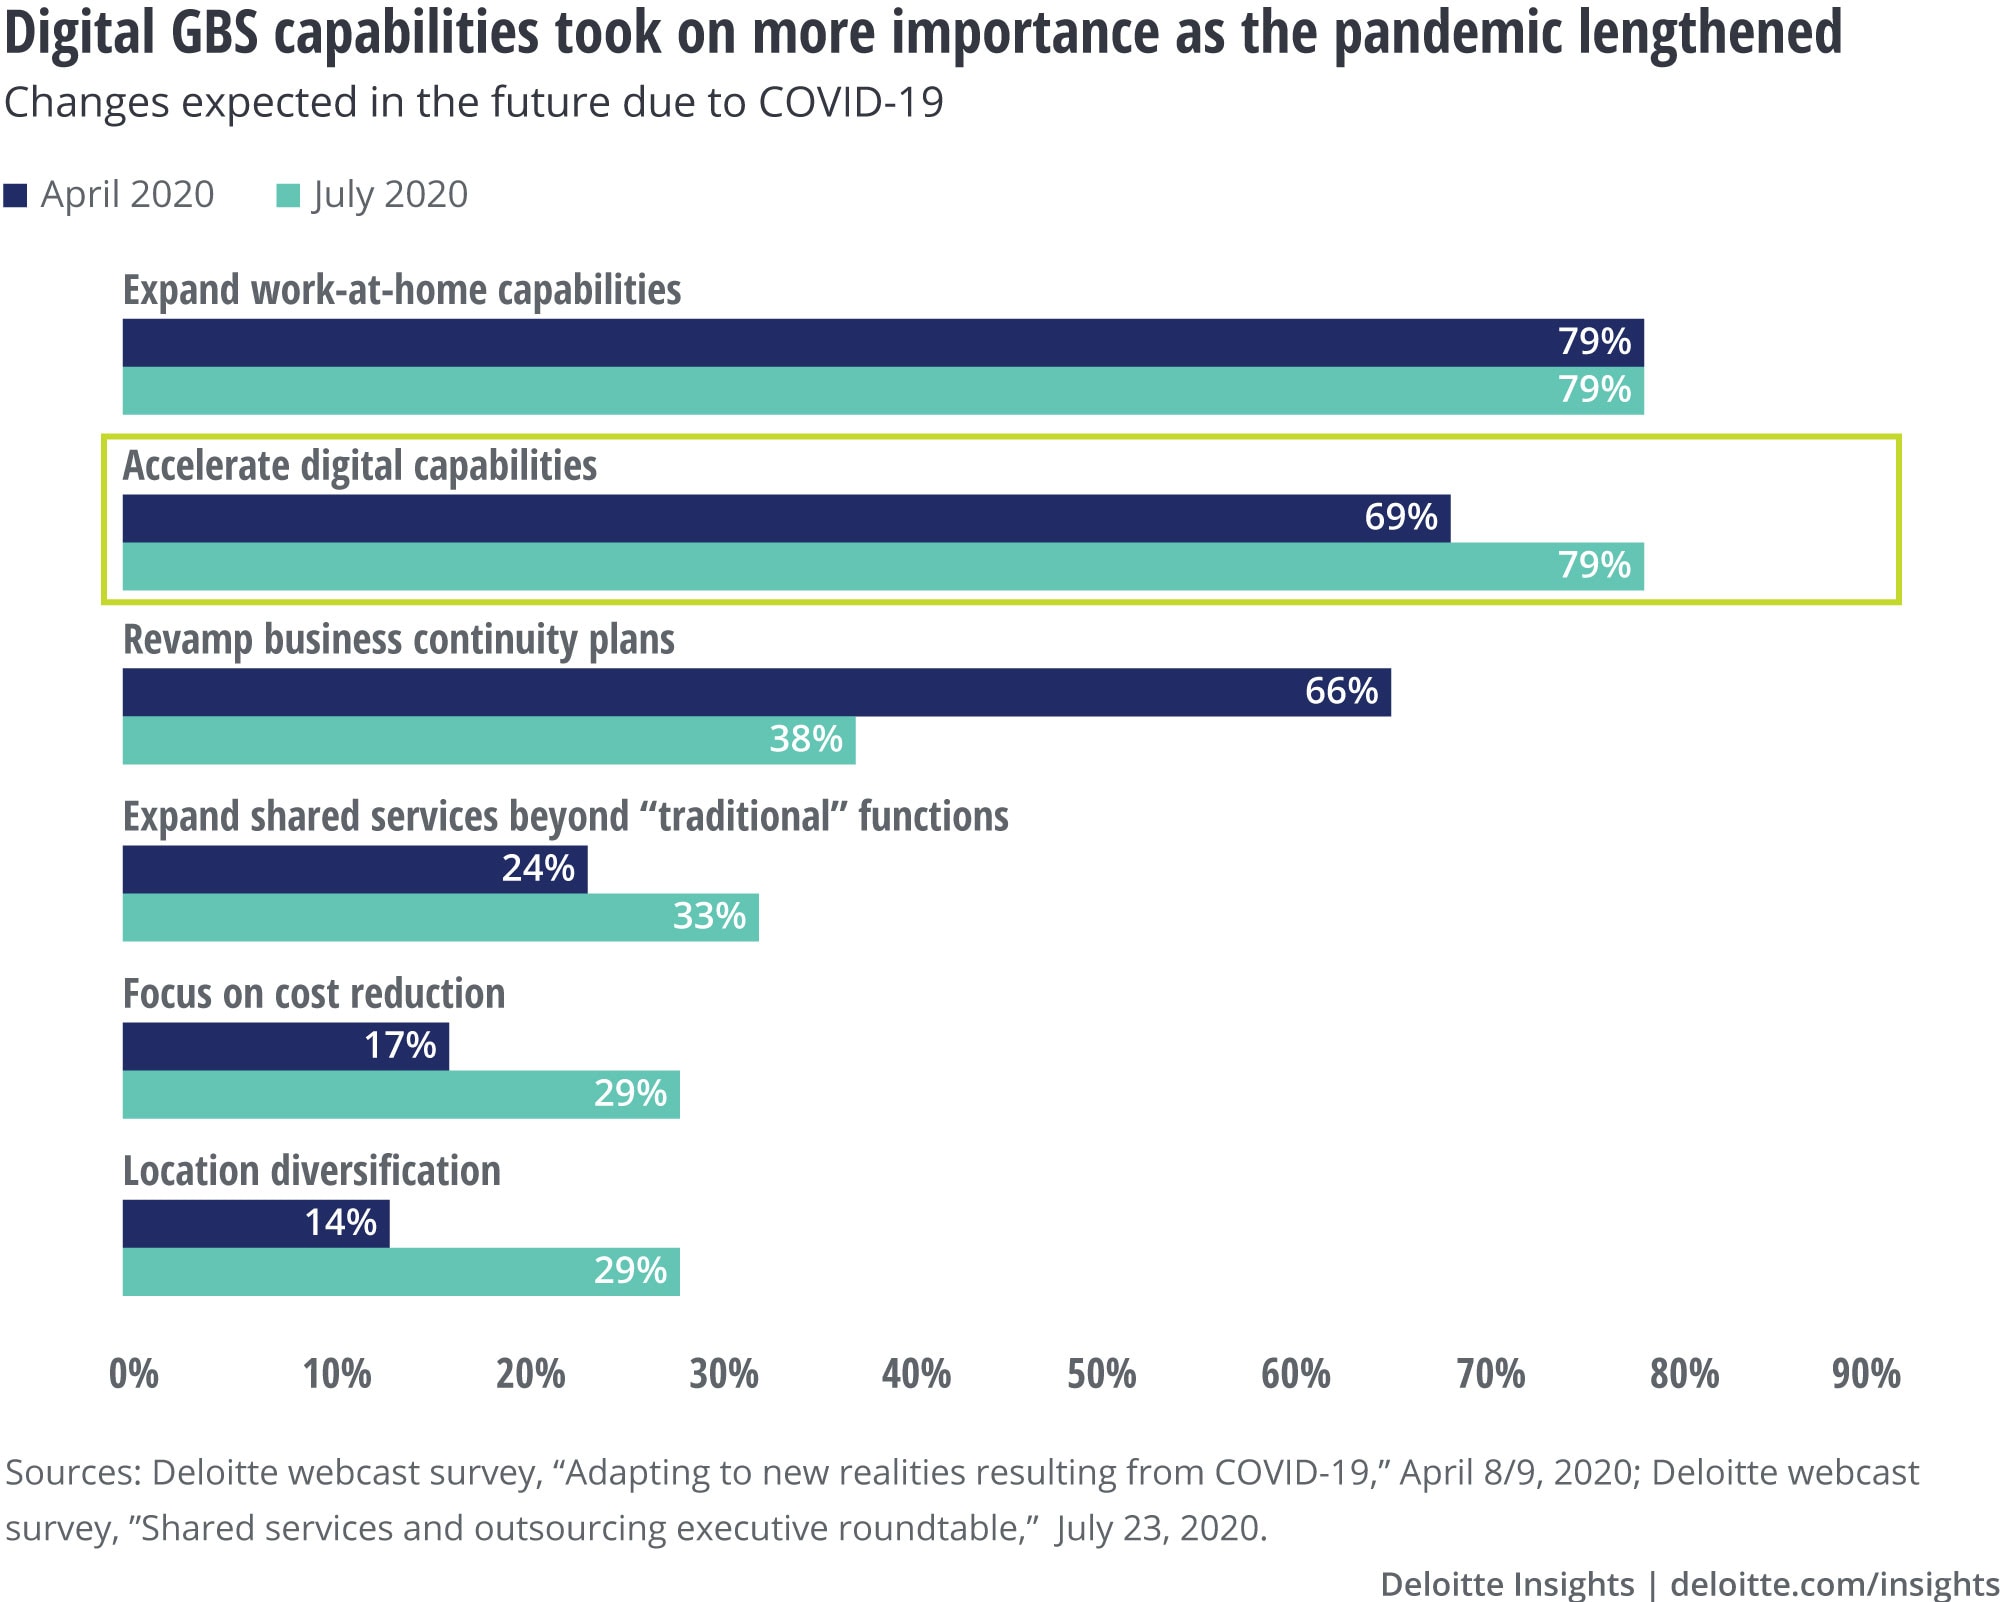 Digital GBS capabilities took on more importance as the pandemic lengthened